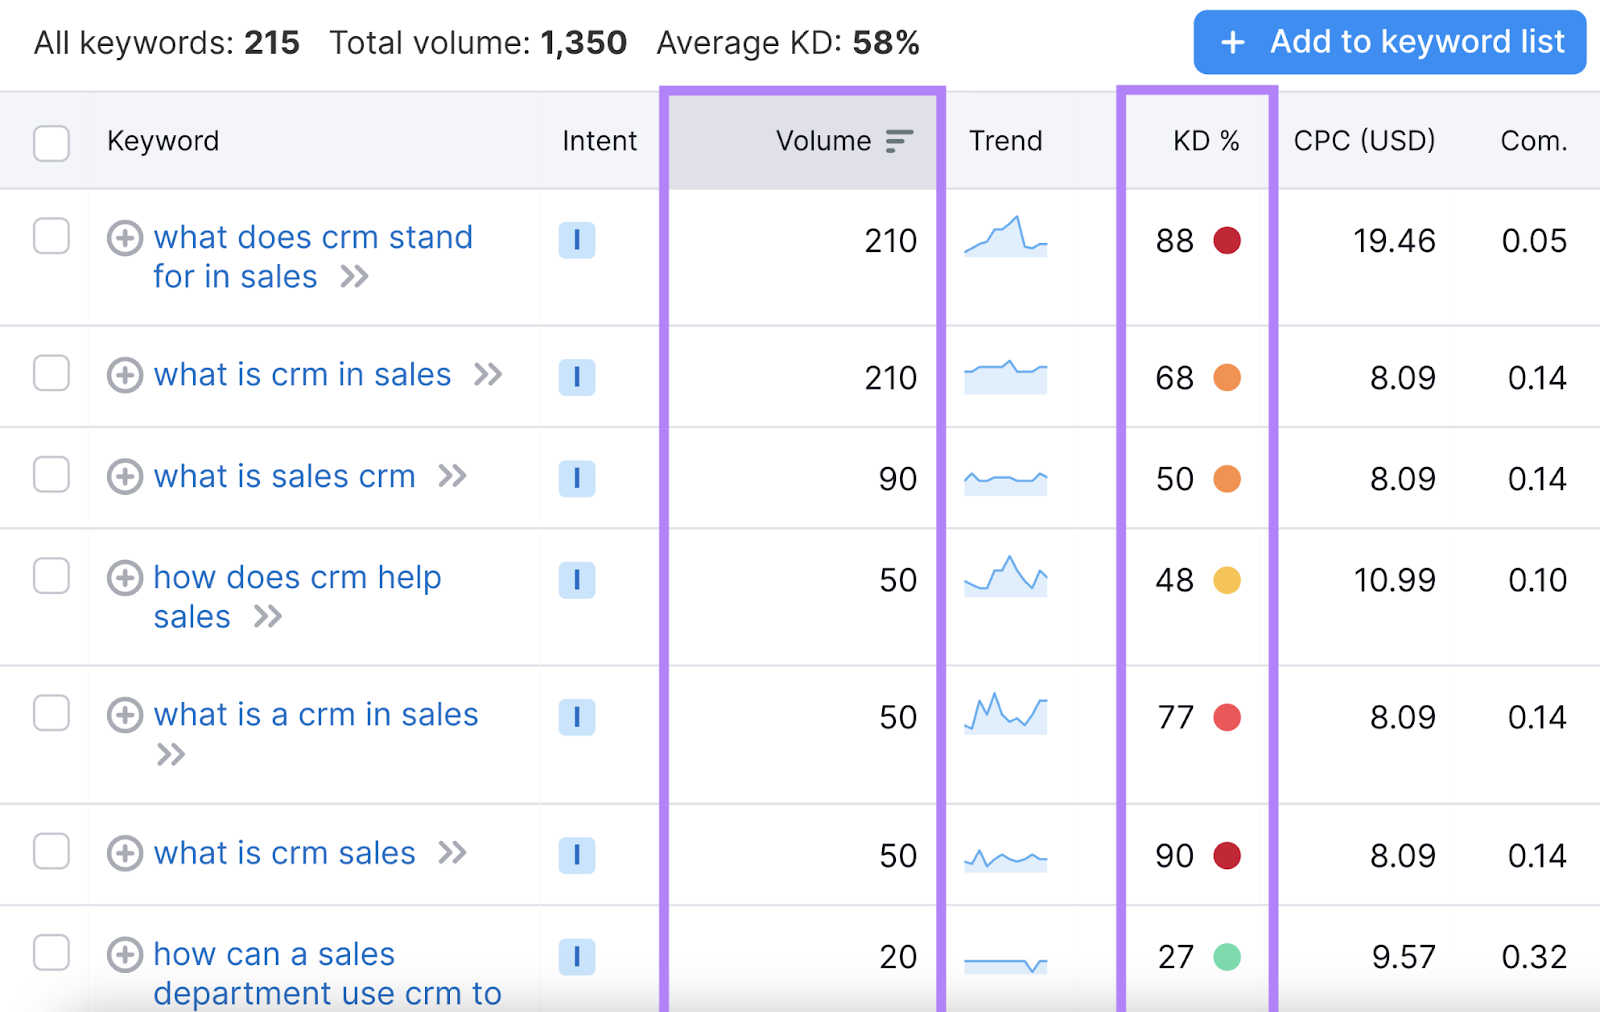 "Volume," and "KD%" columns highlighted in the table